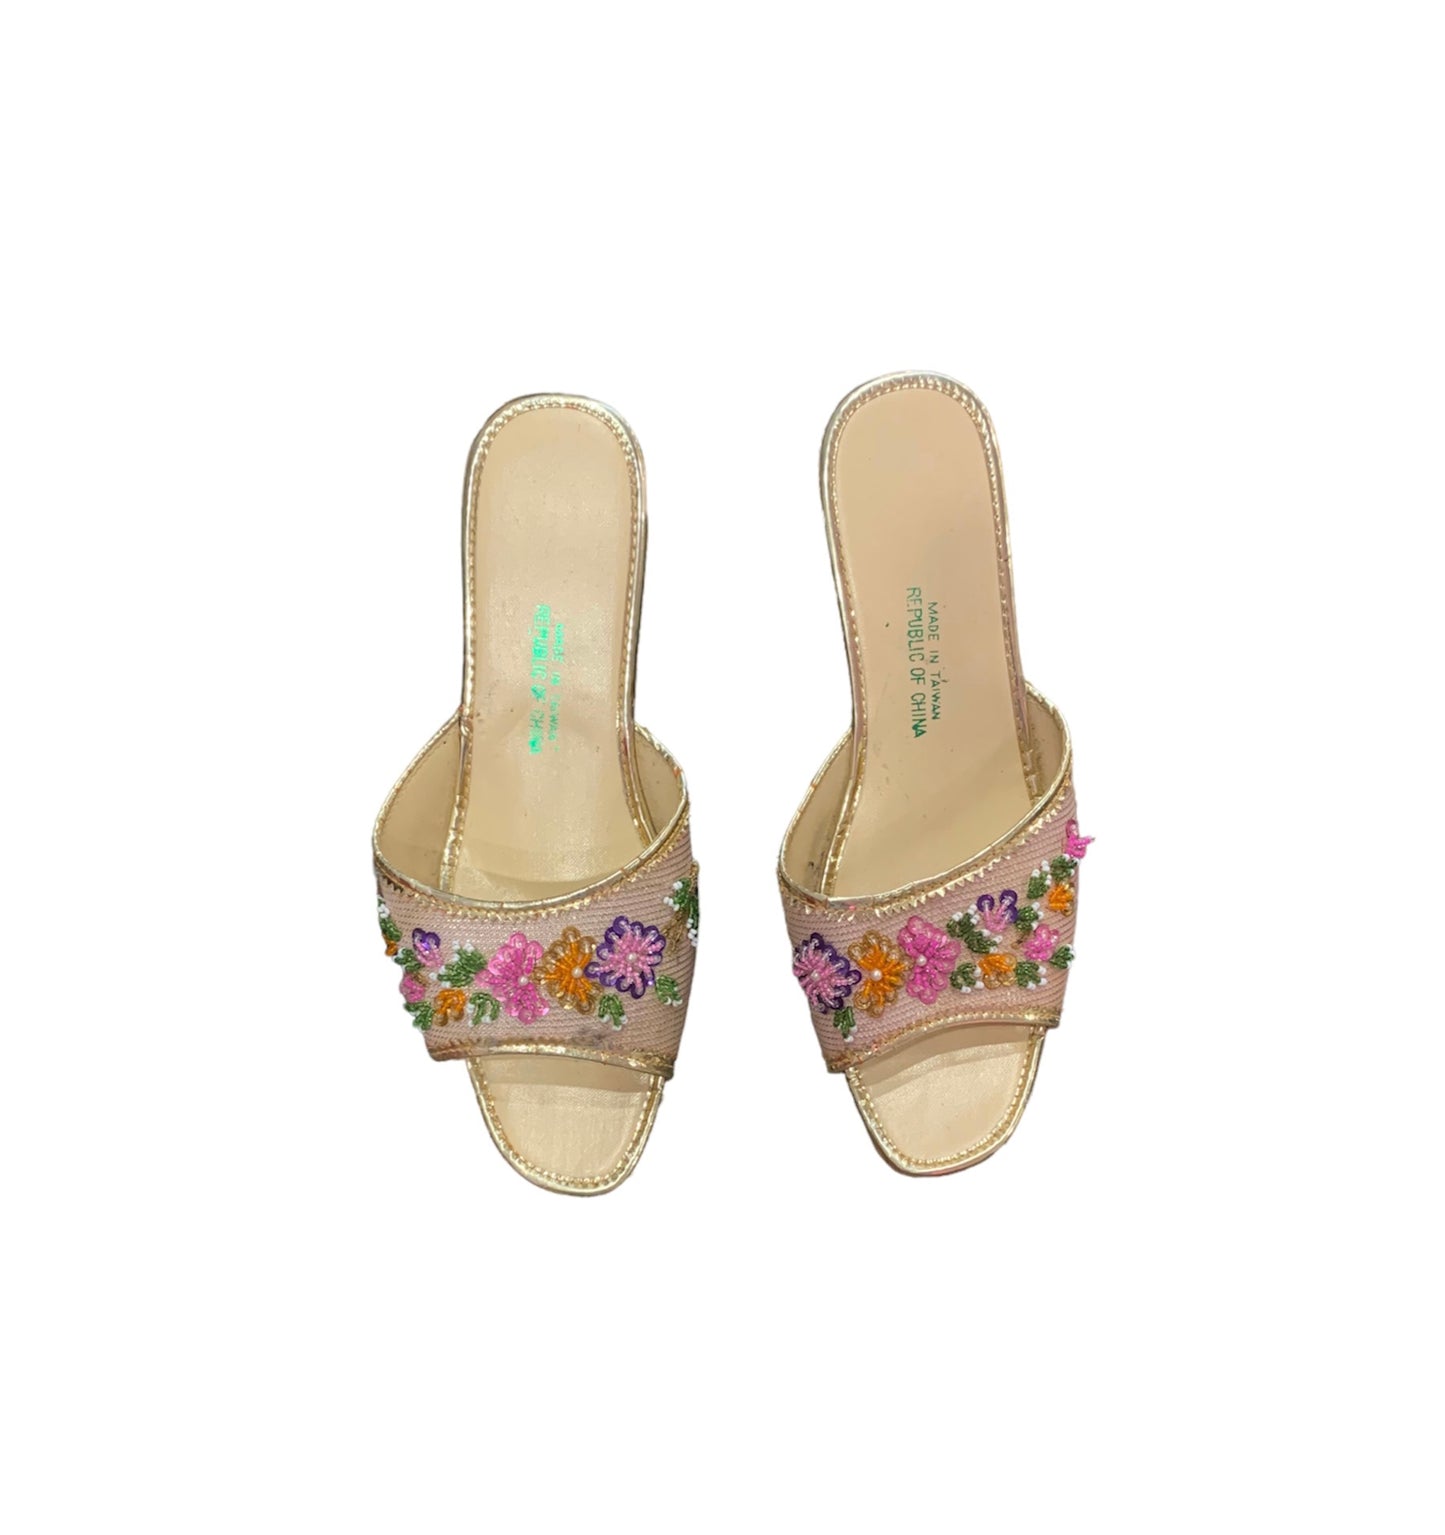 Hand beaded Taiwanese slide on sandals